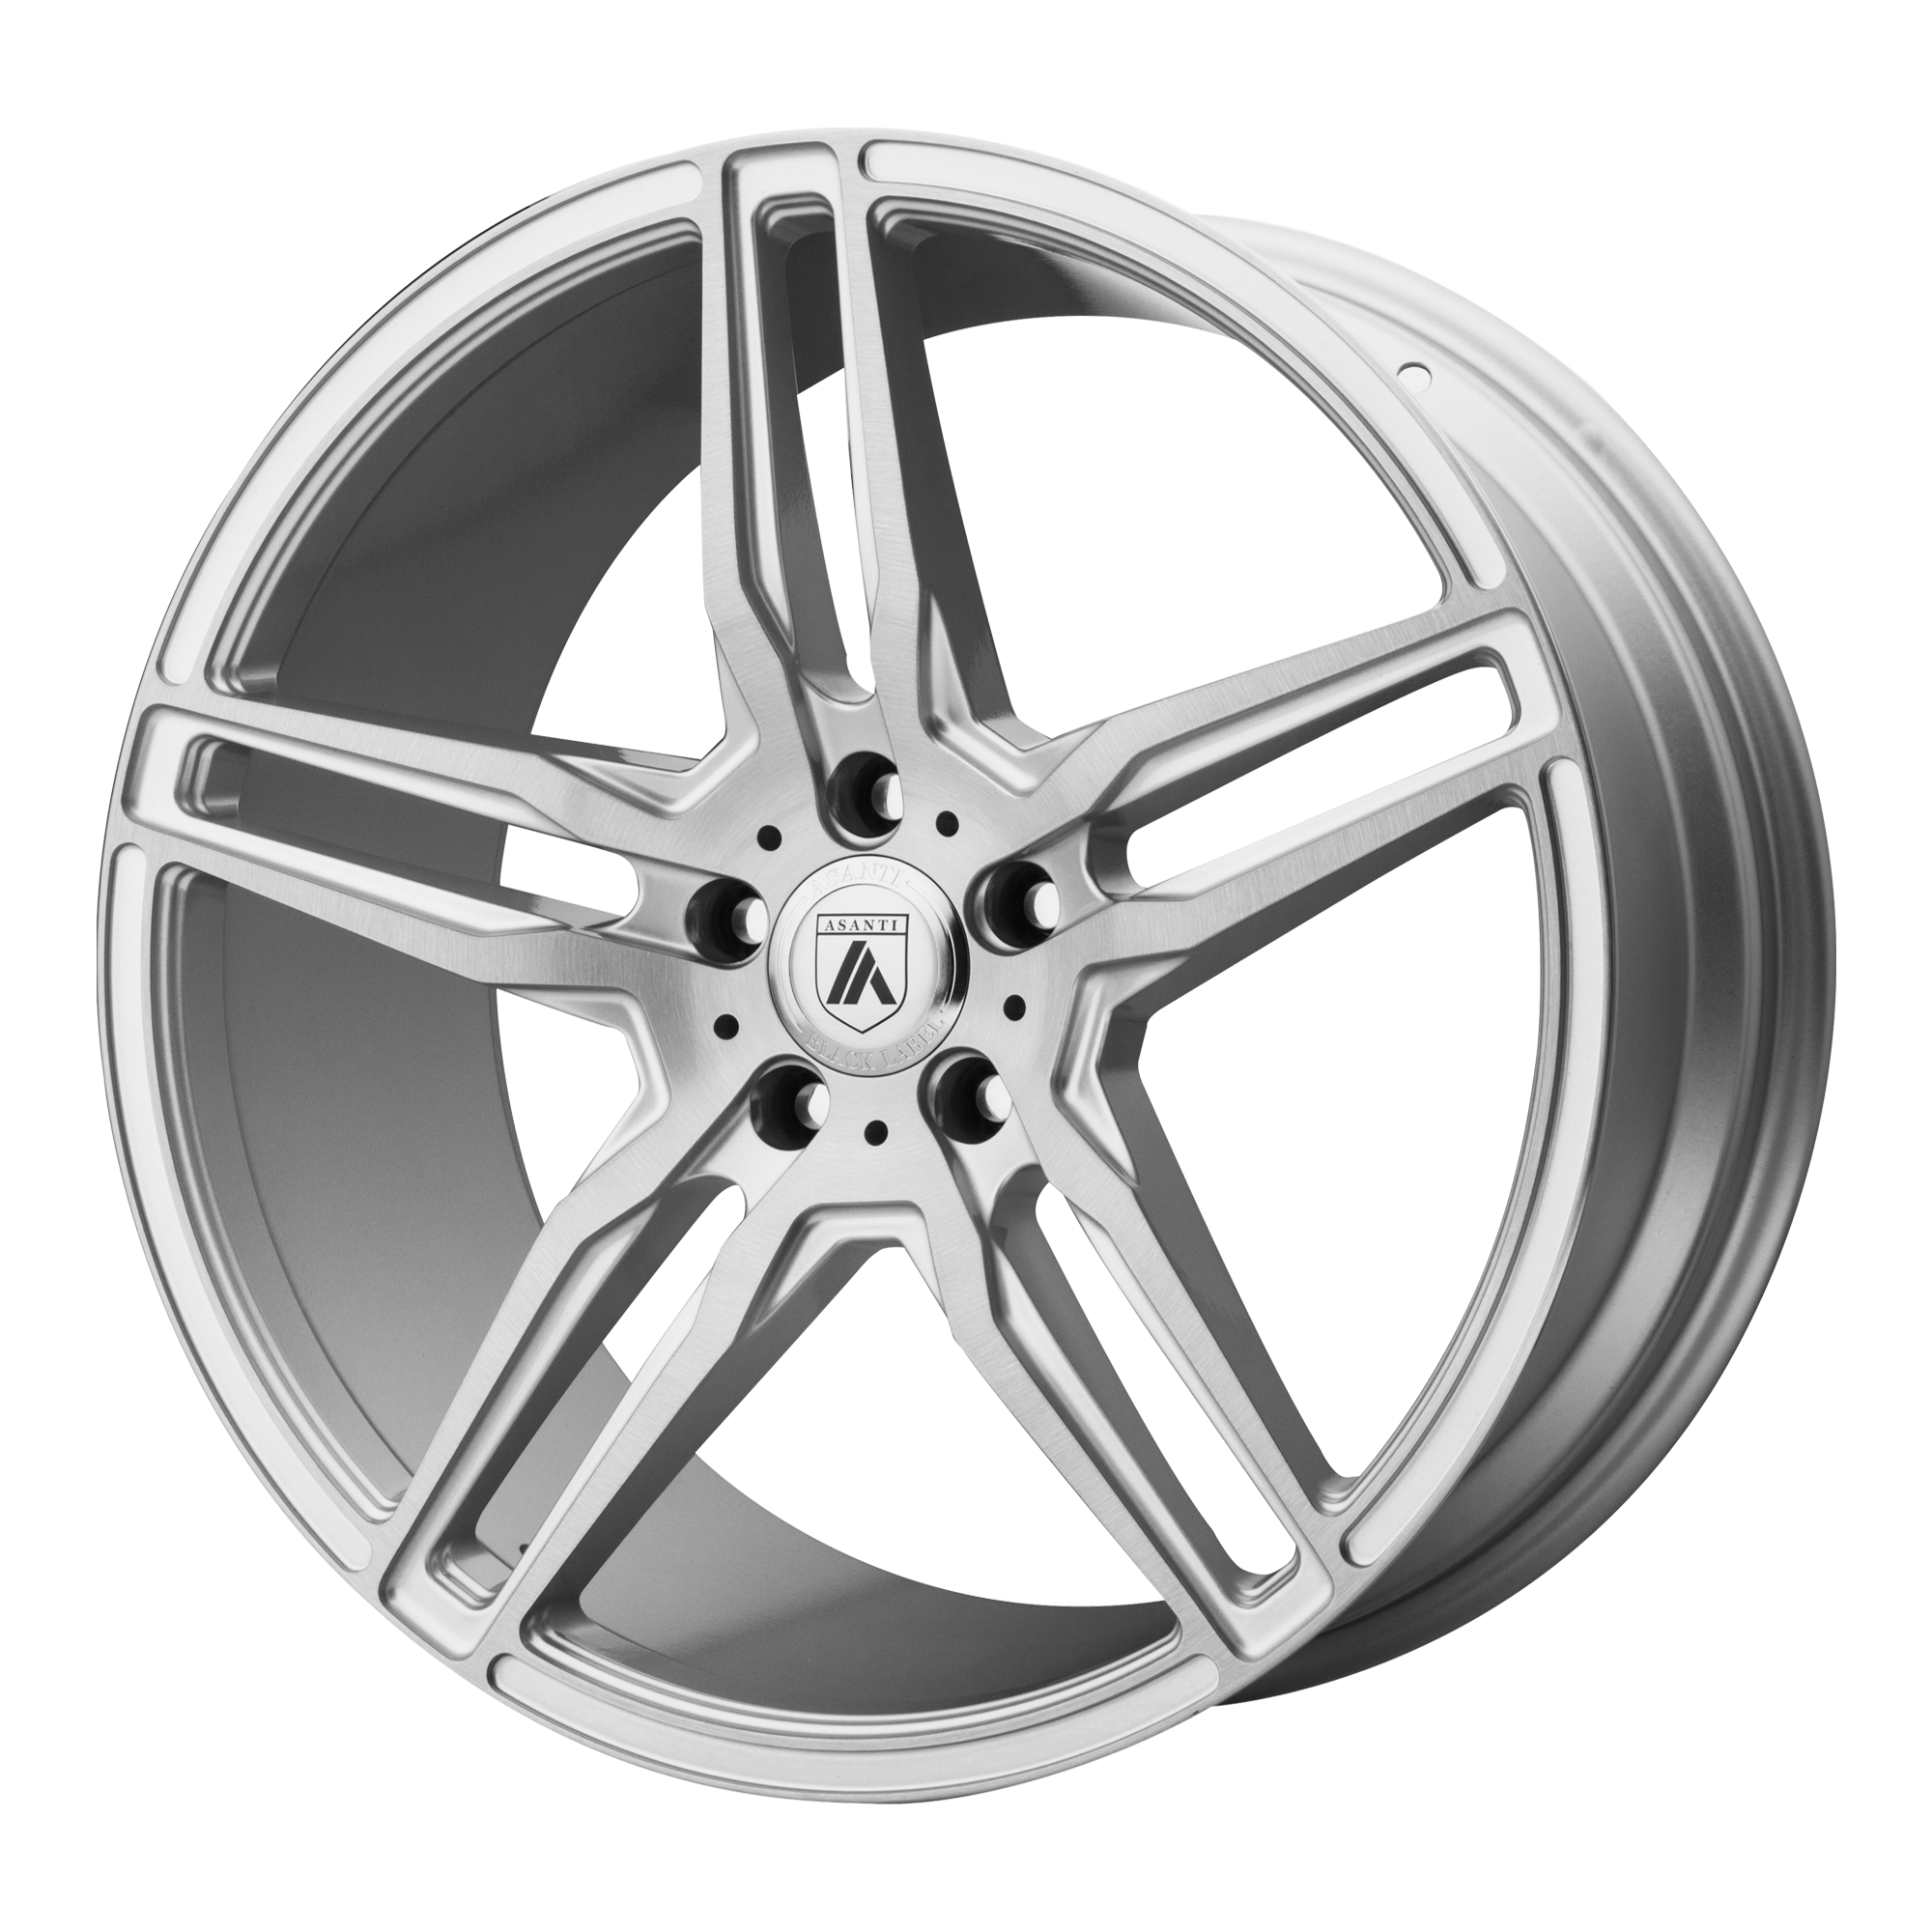 ORION 20x9 Blank BRUSHED SILVER (15.00 - 34.00 mm) - Tires and Engine Performance